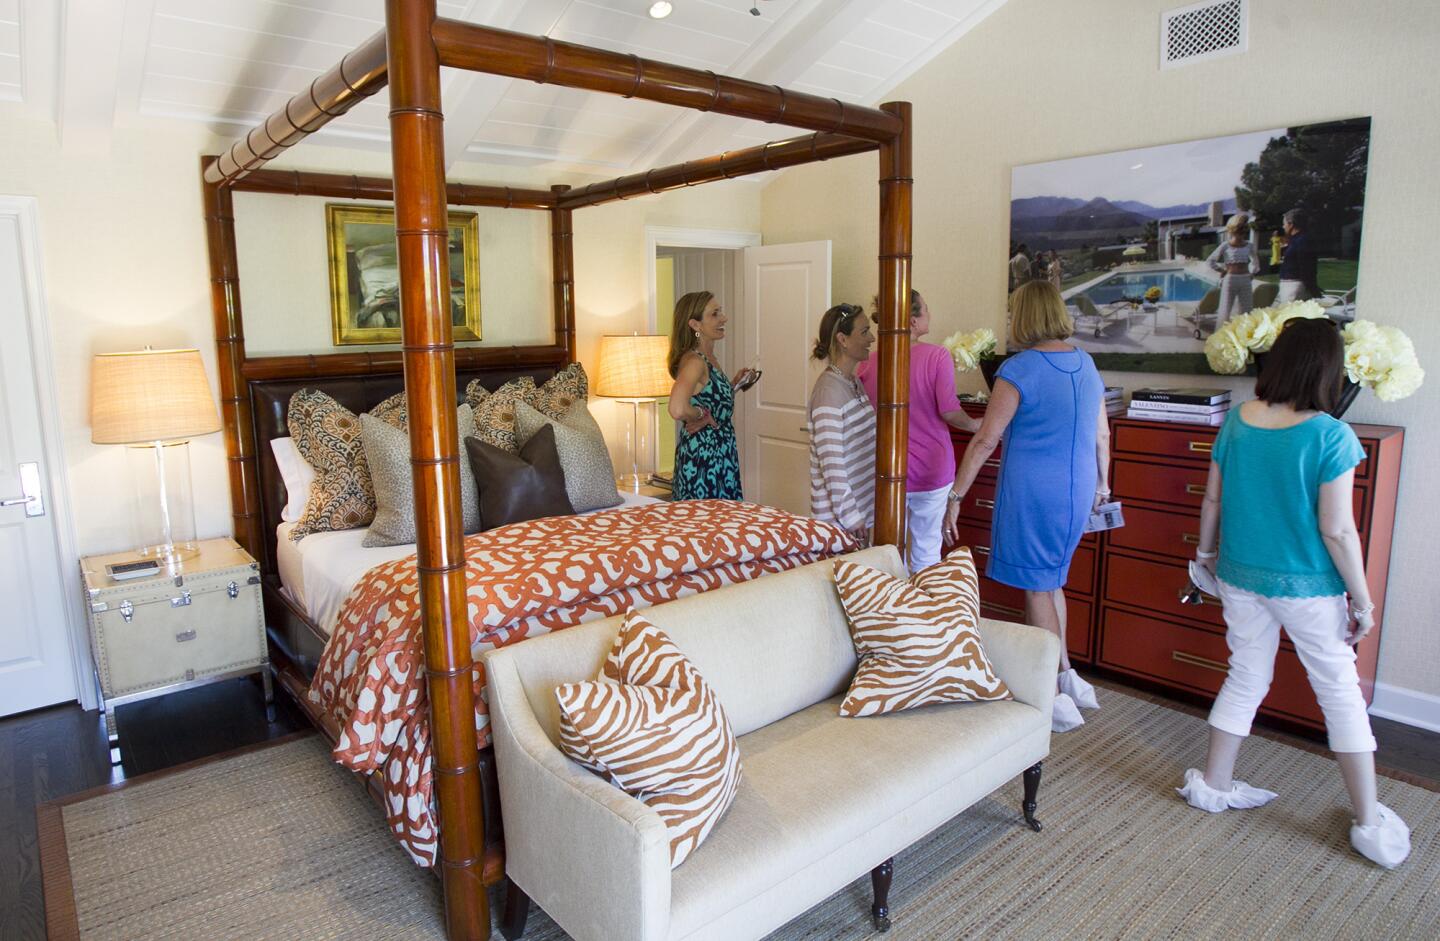 Guests tour the master bedroom at the Butera Residence on 700 East 15th Street on Thursday, May 15. (Scott Smeltzer - Daily Pilot)